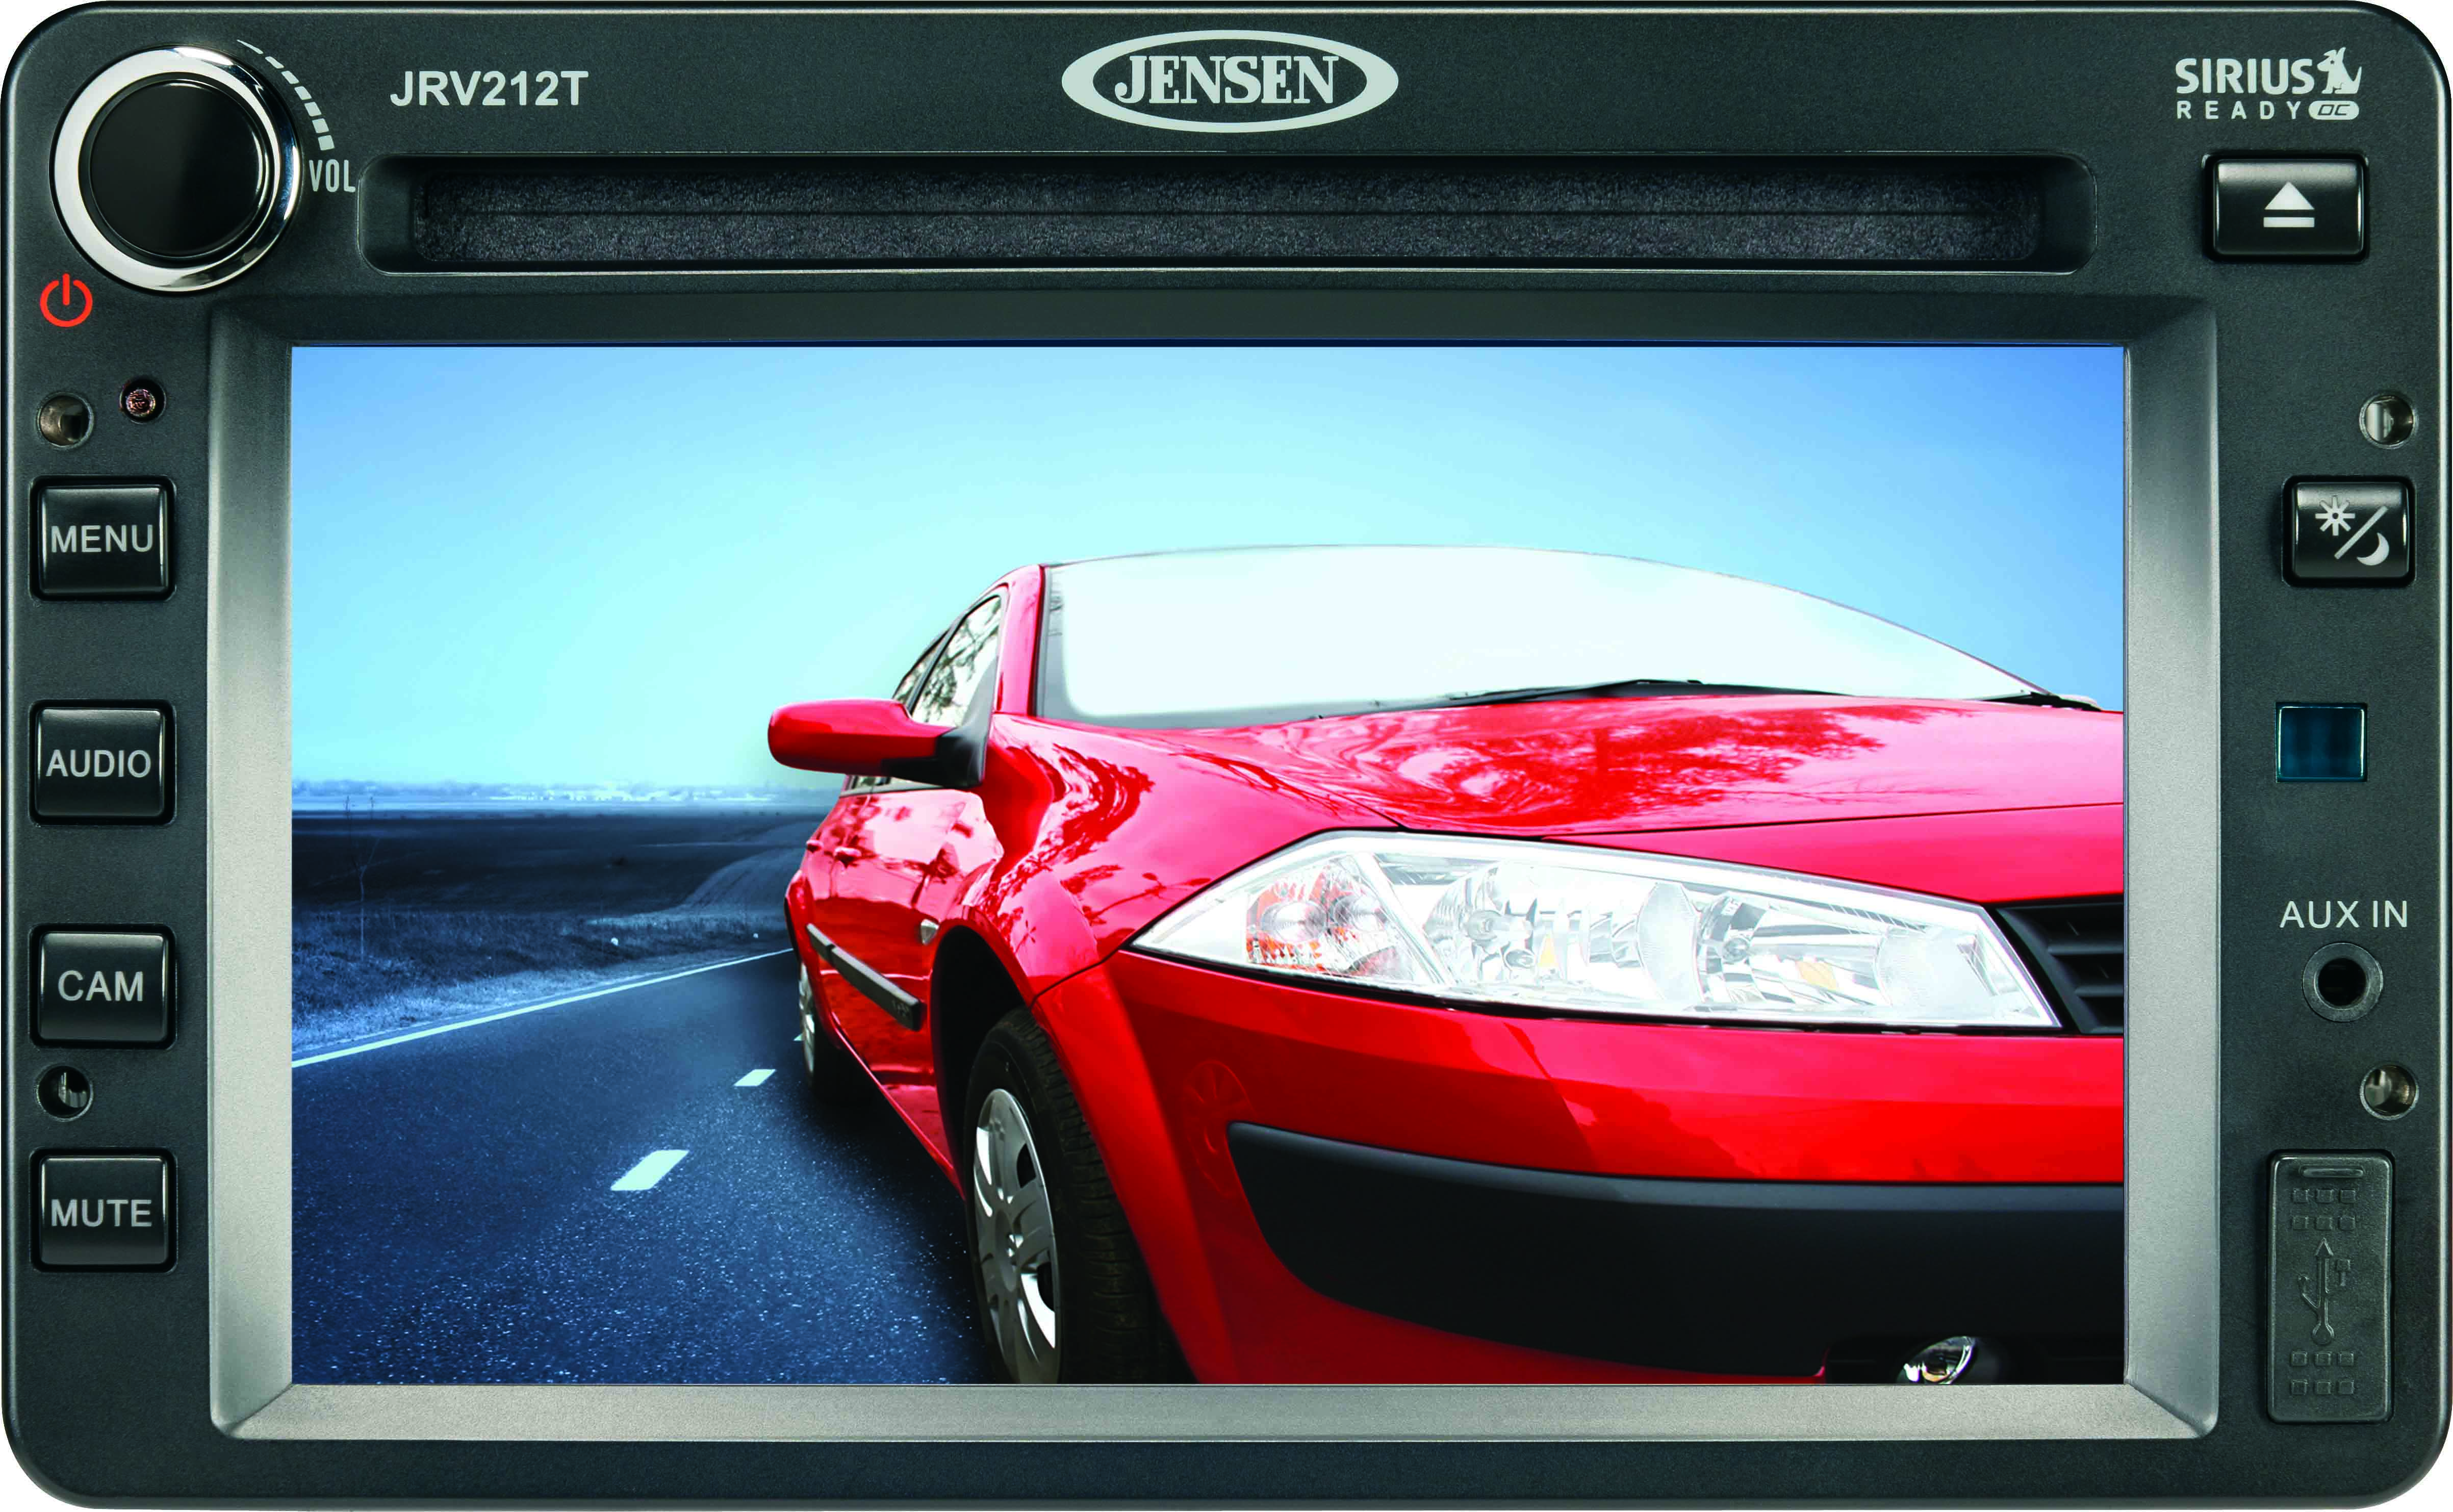 ASA Introduces the NEW JENSEN® JRV212T Touch Screen iPod/SIRIUS and Camera Inputs Stereo